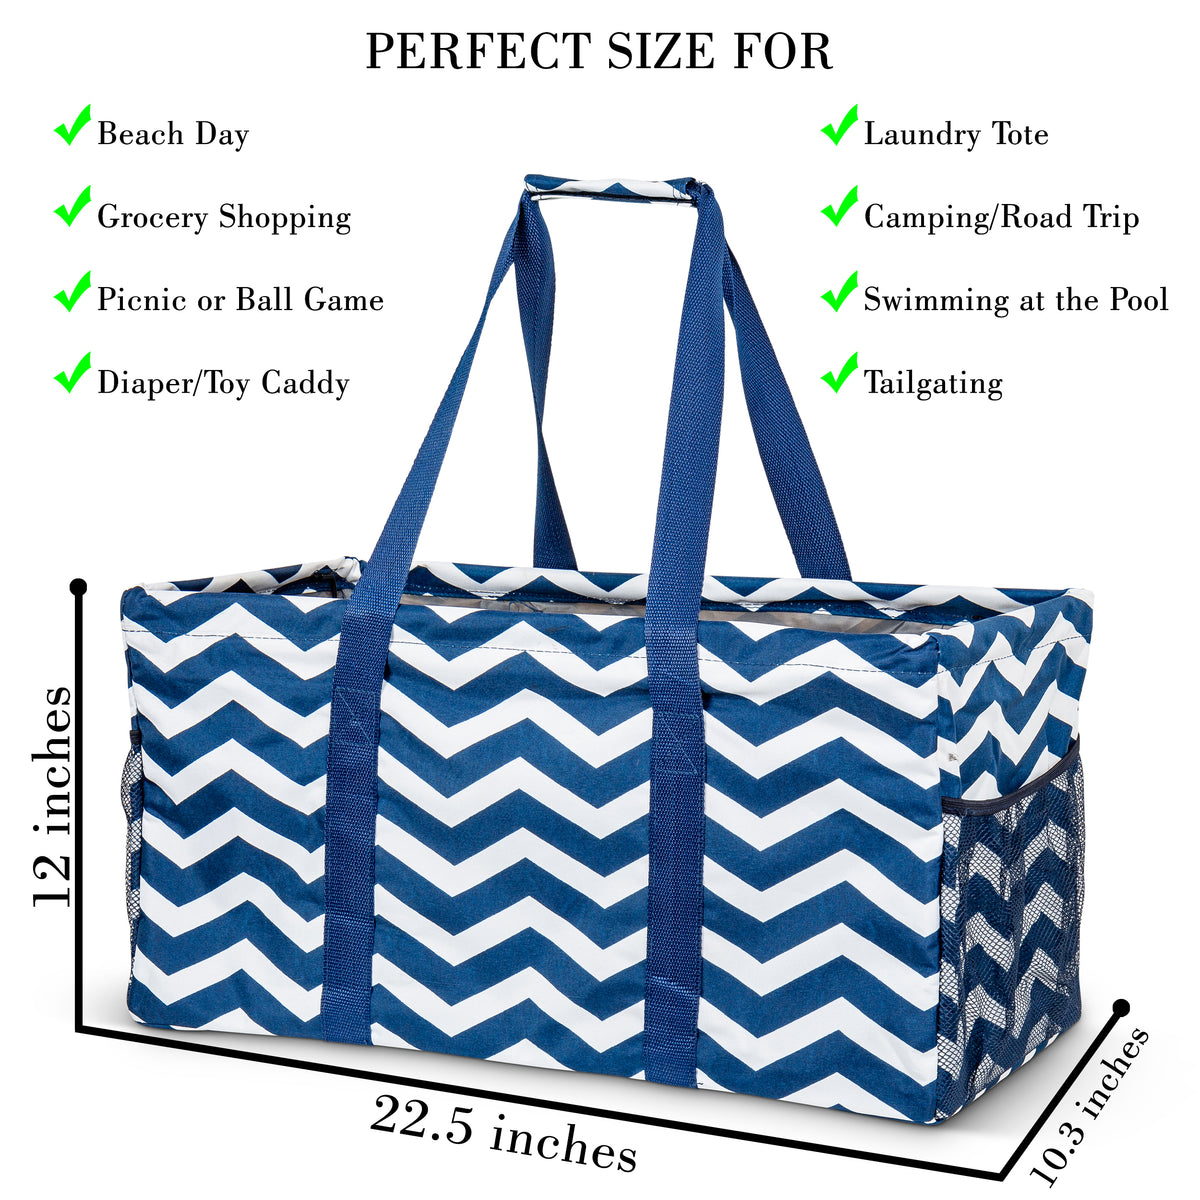 Sharky Business Print Large Canvas Utility Tote Bag-Blue